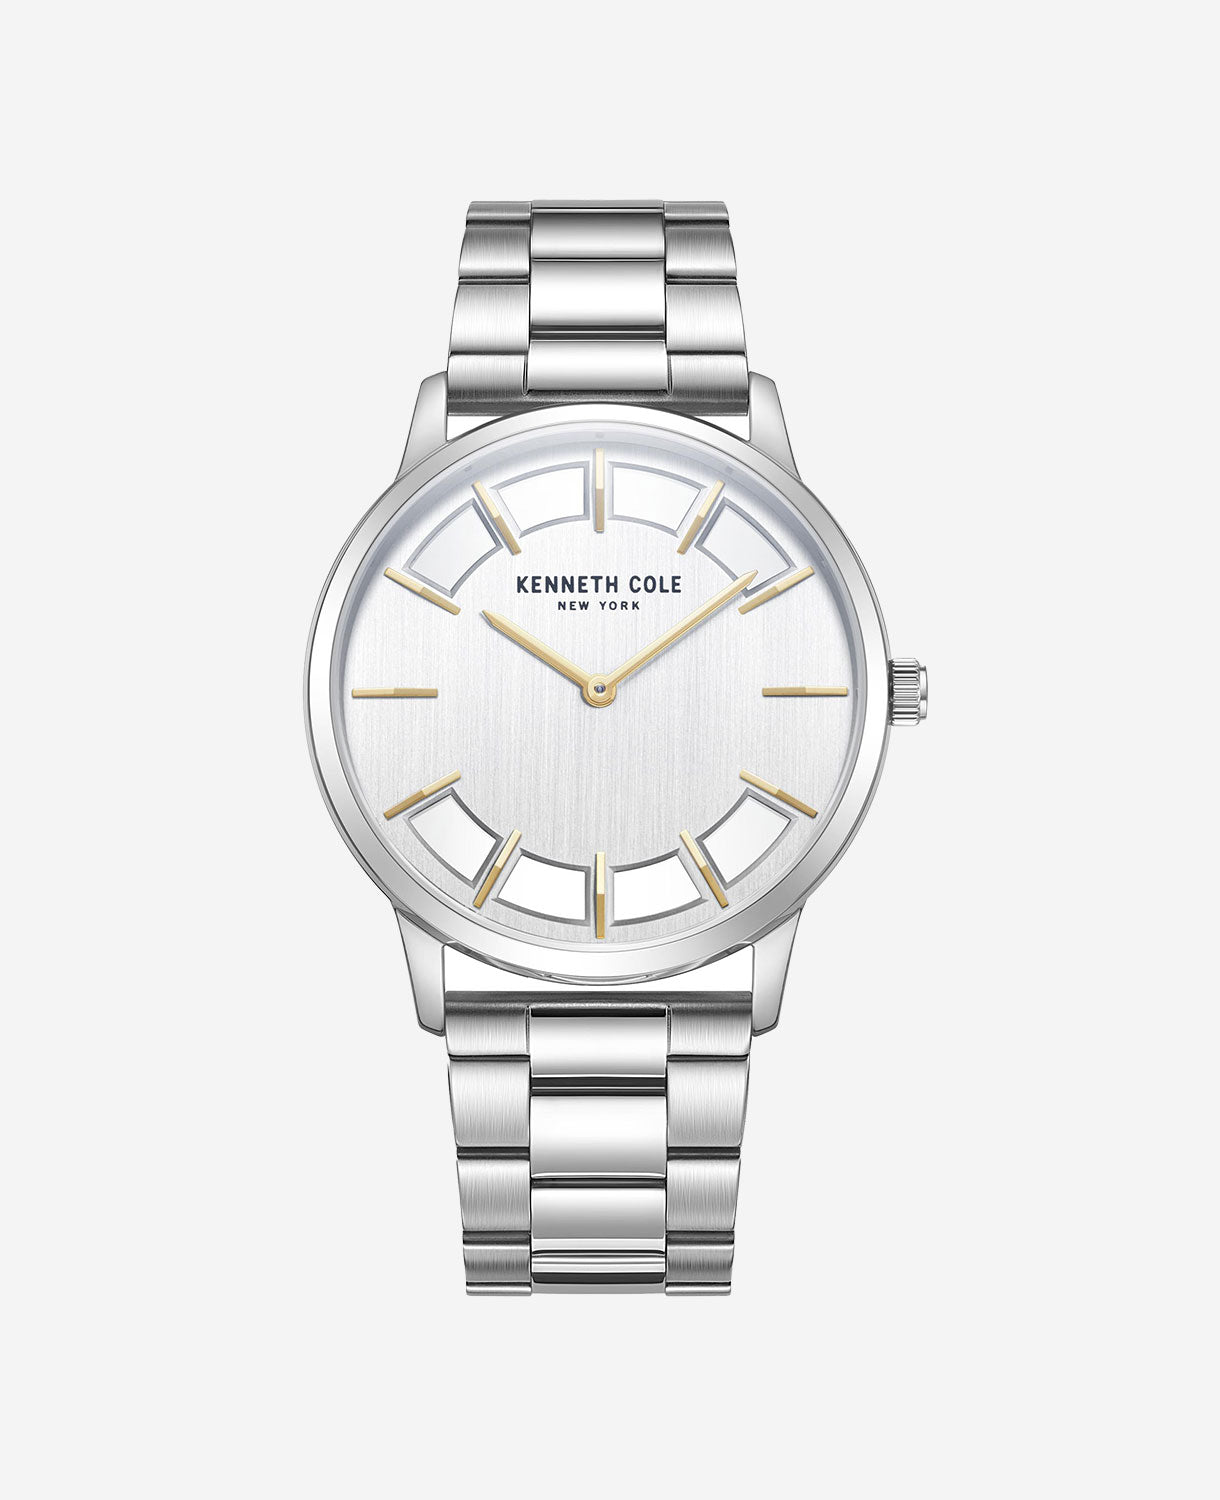 Kenneth Cole New York Men's Transparency Dial Watch